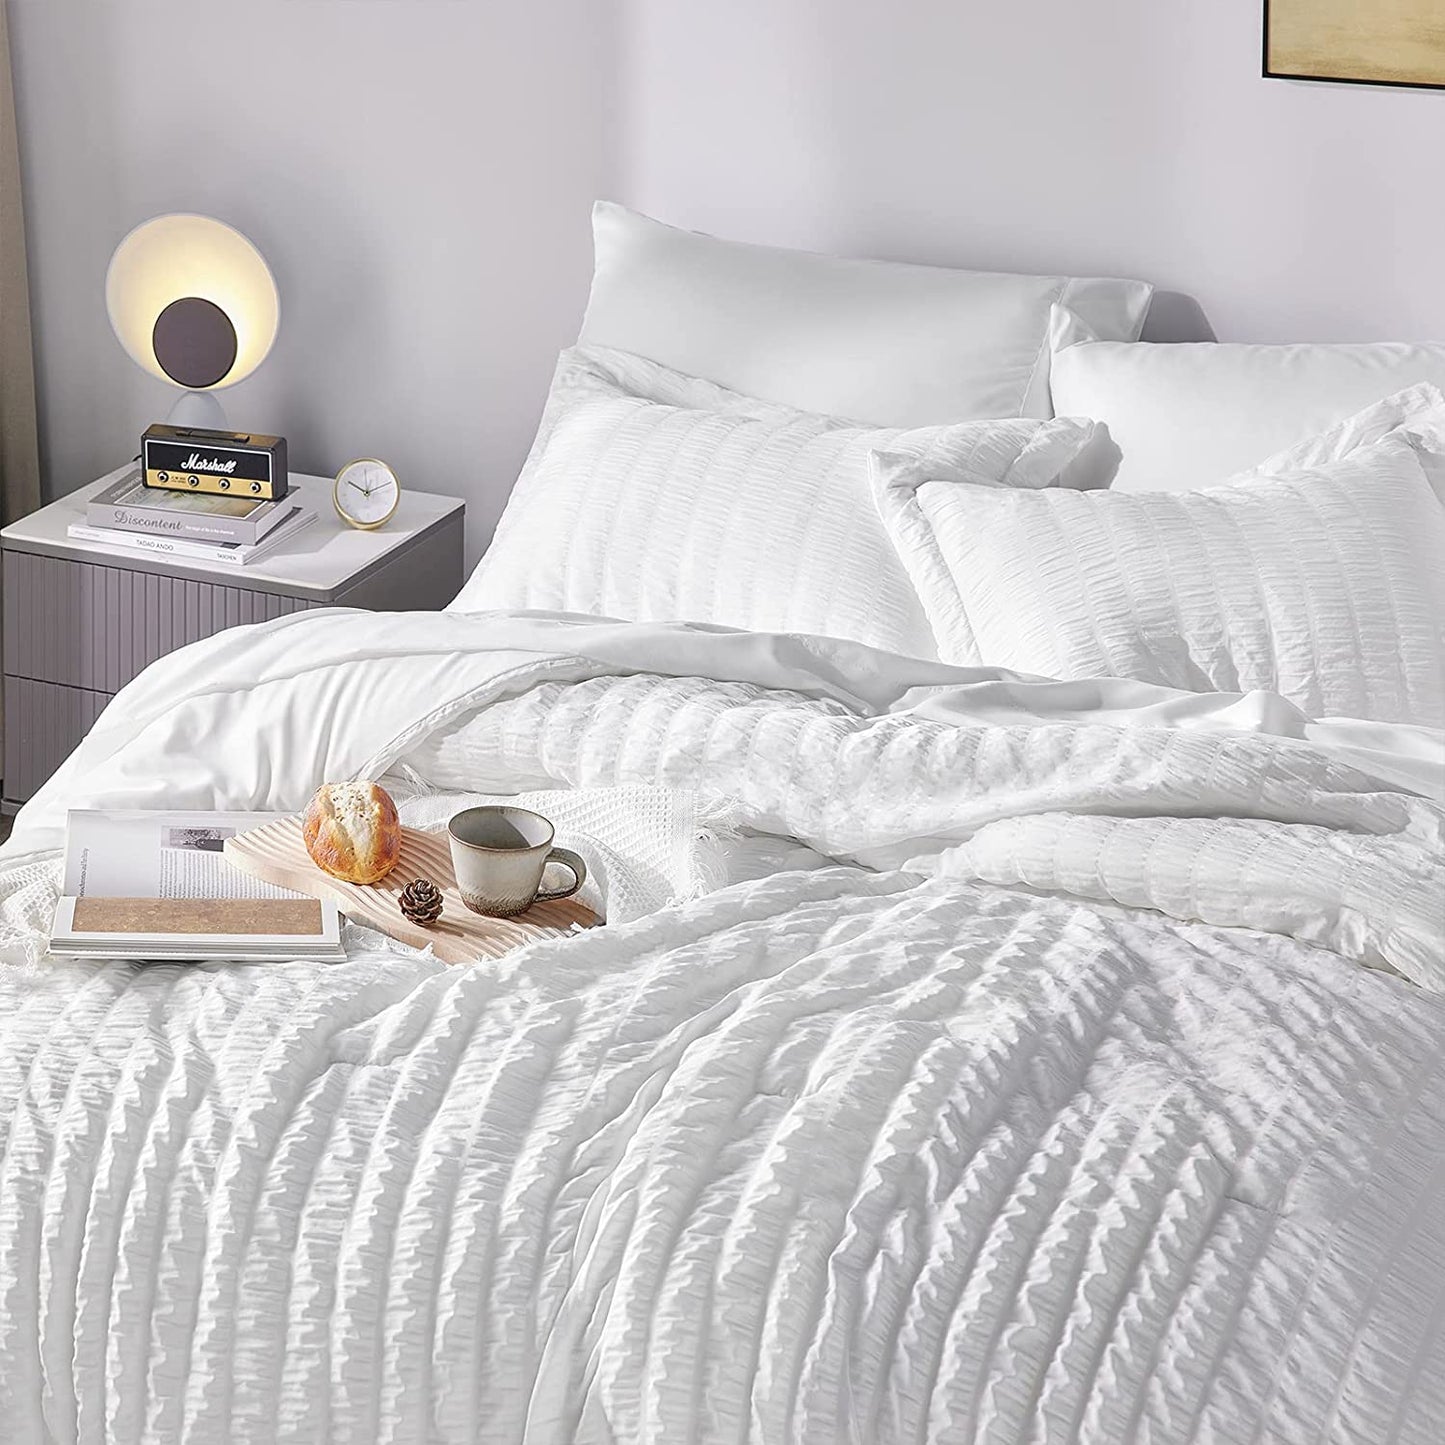 Queen Bed in a Bag White Seersucker Comforter Set with Sheets 7-Pieces All Season Bedding Sets with Comforter, Pillow Sham, Flat Sheet, Fitted Sheet and Pillowcase